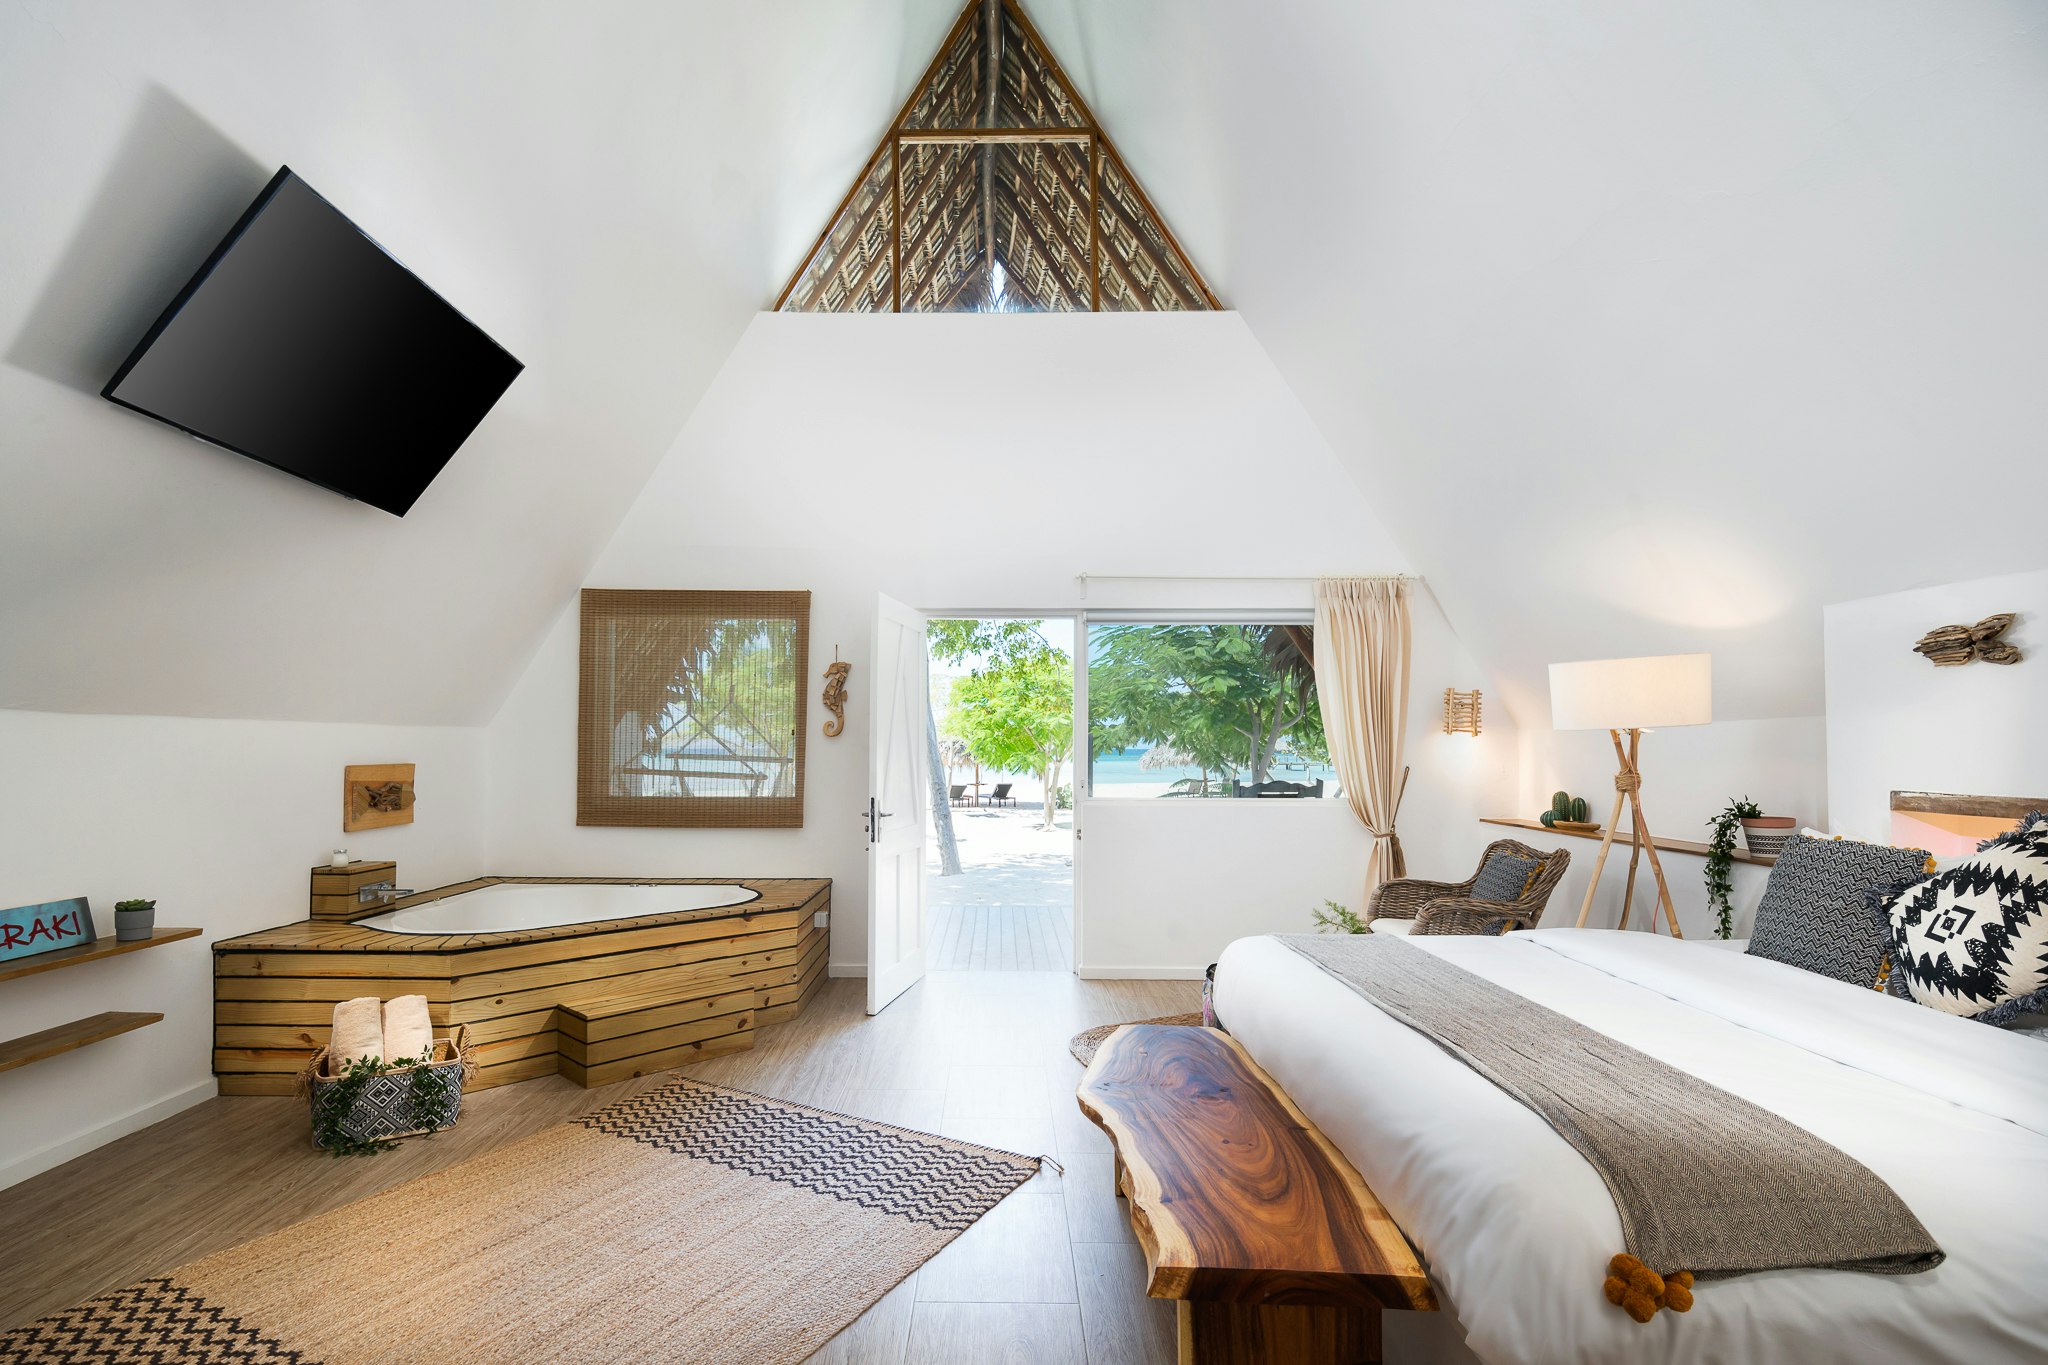 The pristine white interior of a hotel room at Punta Rucia lodge. There is a wooden bathtub to the upper left side of the room, a large flat-screen TV high on the wall, a woven mat and a well-made bed. The door of the room is open showcasing a view of trees along the beach.